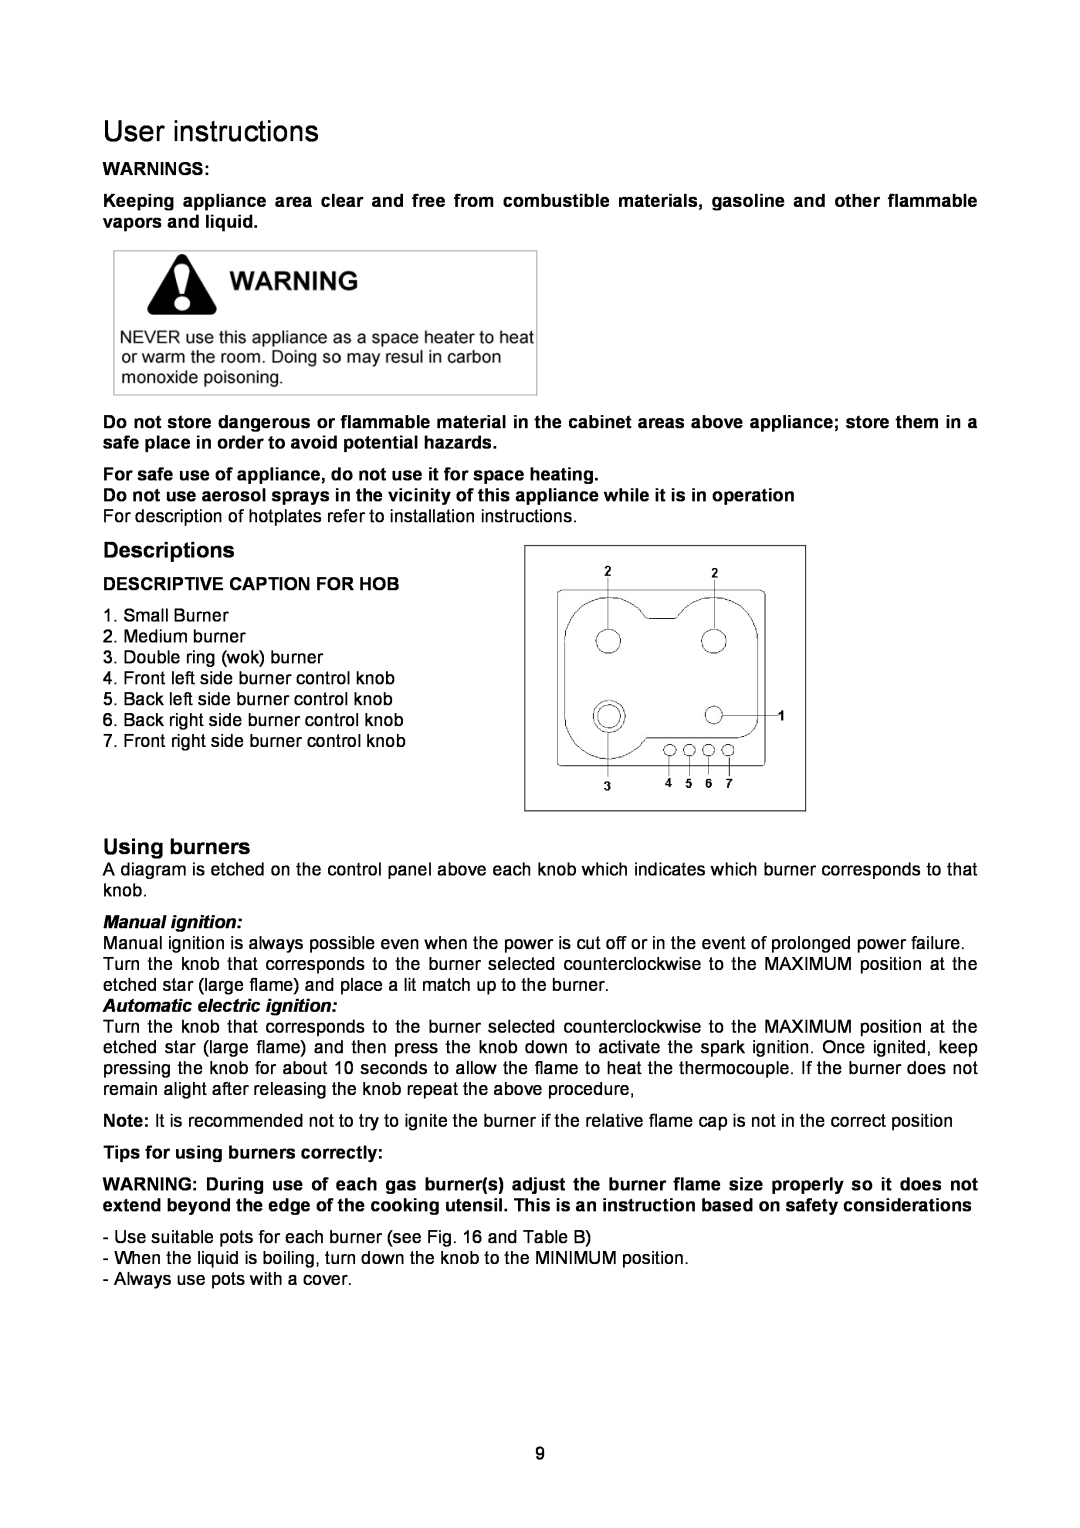 Bertazzoni P24400X manual User instructions, Descriptions, Using burners, Manual ignition, Automatic electric ignition 